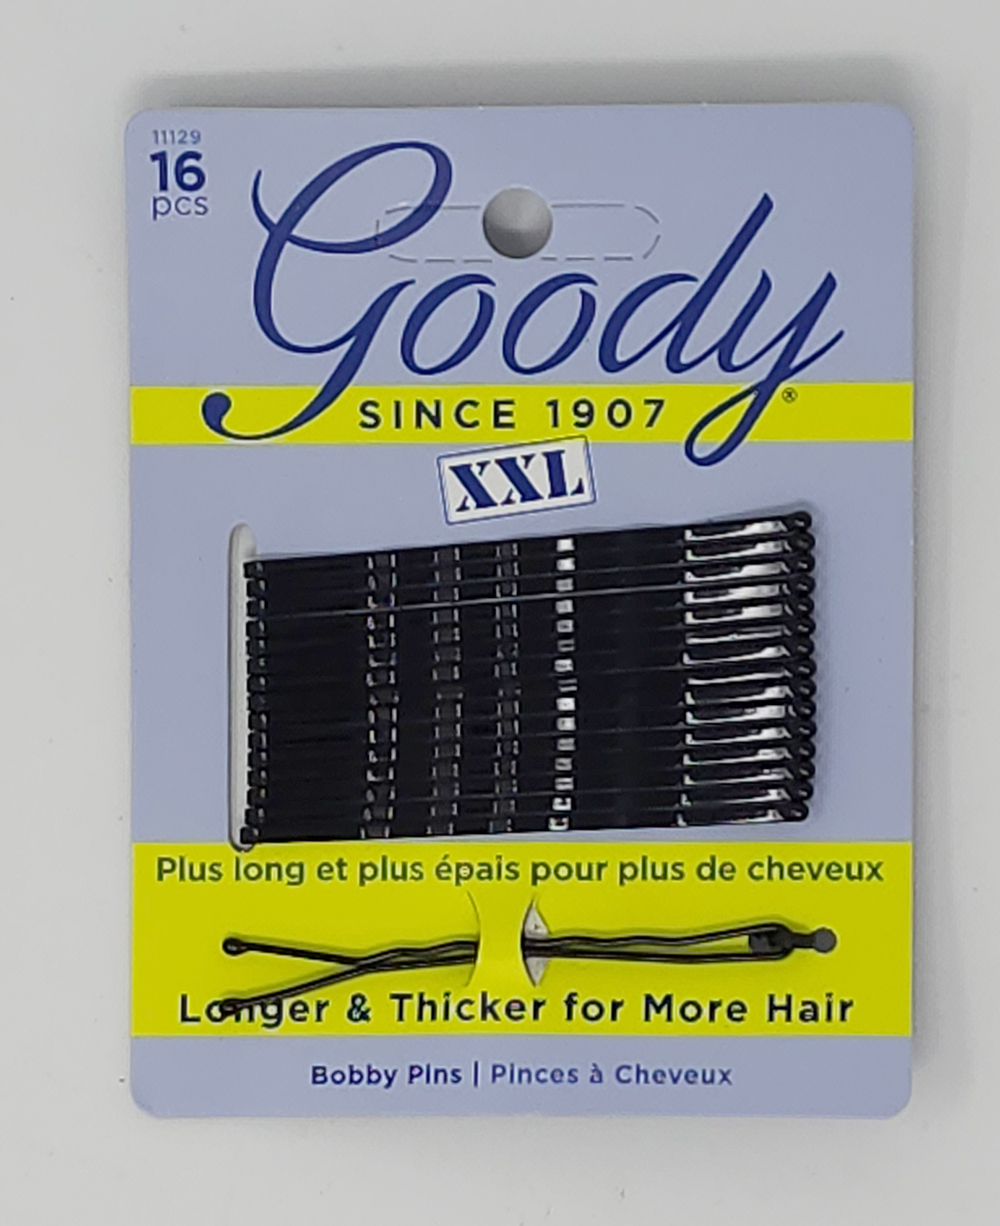 Goody Black Bobby Pins 16 Count - Longer and Thicker for More Hair